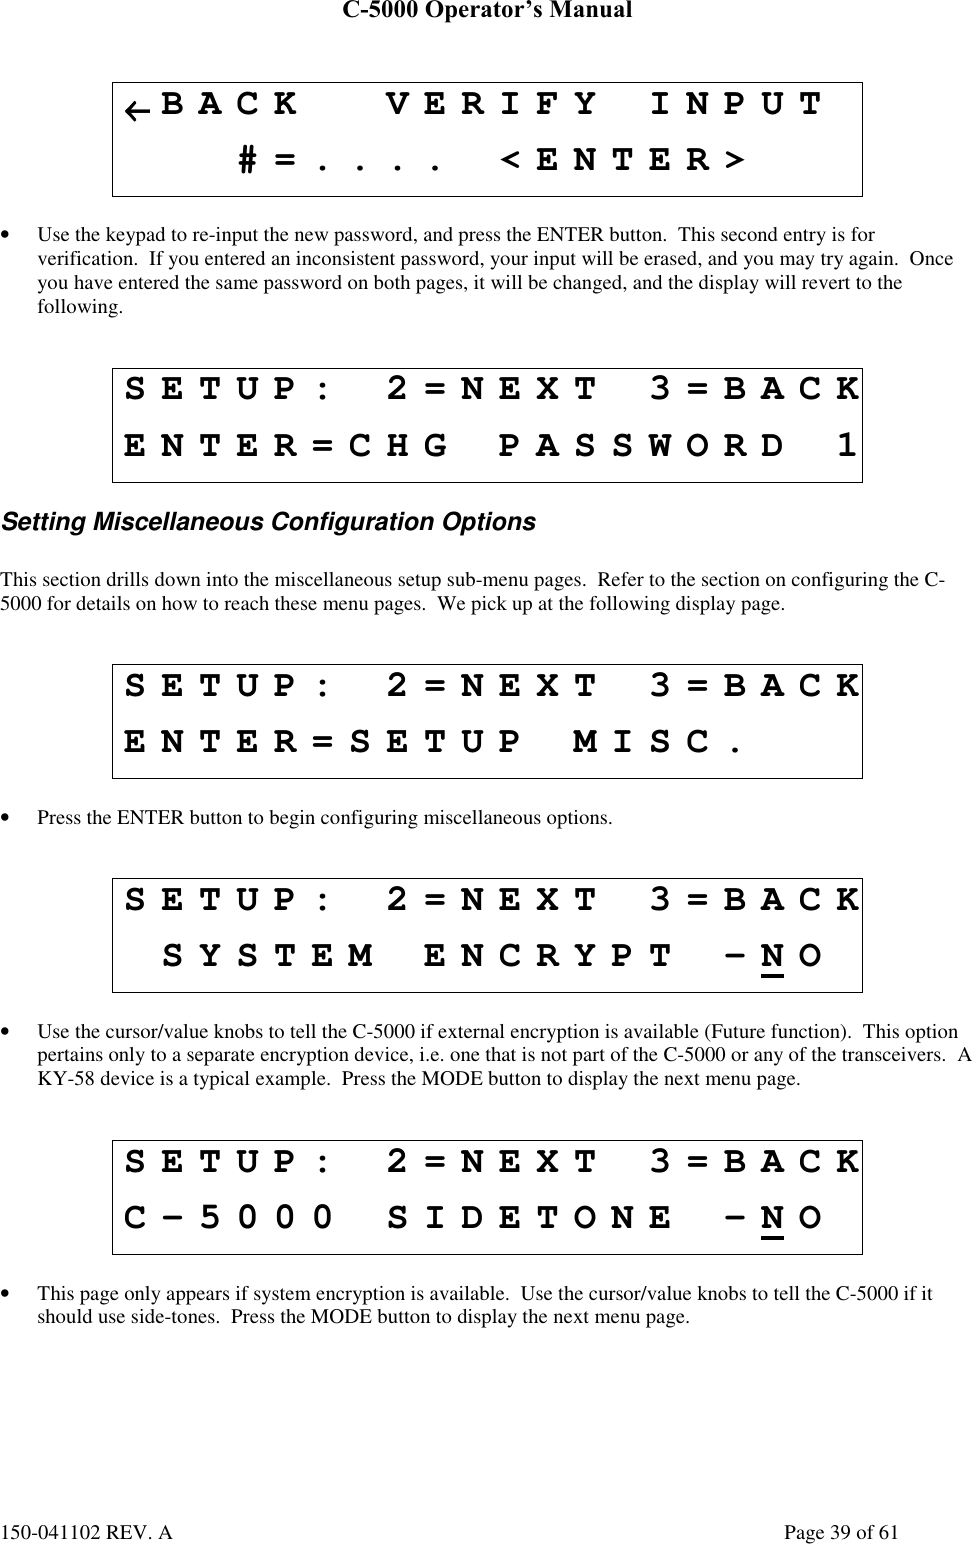 C-5000 Operator’s Manual150-041102 REV. A Page 39 of 61←←←←BACK VERIFY INPUT#=.... &lt;ENTER&gt;• Use the keypad to re-input the new password, and press the ENTER button.  This second entry is forverification.  If you entered an inconsistent password, your input will be erased, and you may try again.  Onceyou have entered the same password on both pages, it will be changed, and the display will revert to thefollowing.SETUP: 2=NEXT 3=BACKENTER=CHG PASSWORD 1Setting Miscellaneous Configuration OptionsThis section drills down into the miscellaneous setup sub-menu pages.  Refer to the section on configuring the C-5000 for details on how to reach these menu pages.  We pick up at the following display page.SETUP: 2=NEXT 3=BACKENTER=SETUP MISC.• Press the ENTER button to begin configuring miscellaneous options.SETUP: 2=NEXT 3=BACKSYSTEM ENCRYPT -NO• Use the cursor/value knobs to tell the C-5000 if external encryption is available (Future function).  This optionpertains only to a separate encryption device, i.e. one that is not part of the C-5000 or any of the transceivers.  AKY-58 device is a typical example.  Press the MODE button to display the next menu page.SETUP: 2=NEXT 3=BACKC-5000 SIDETONE -NO• This page only appears if system encryption is available.  Use the cursor/value knobs to tell the C-5000 if itshould use side-tones.  Press the MODE button to display the next menu page.